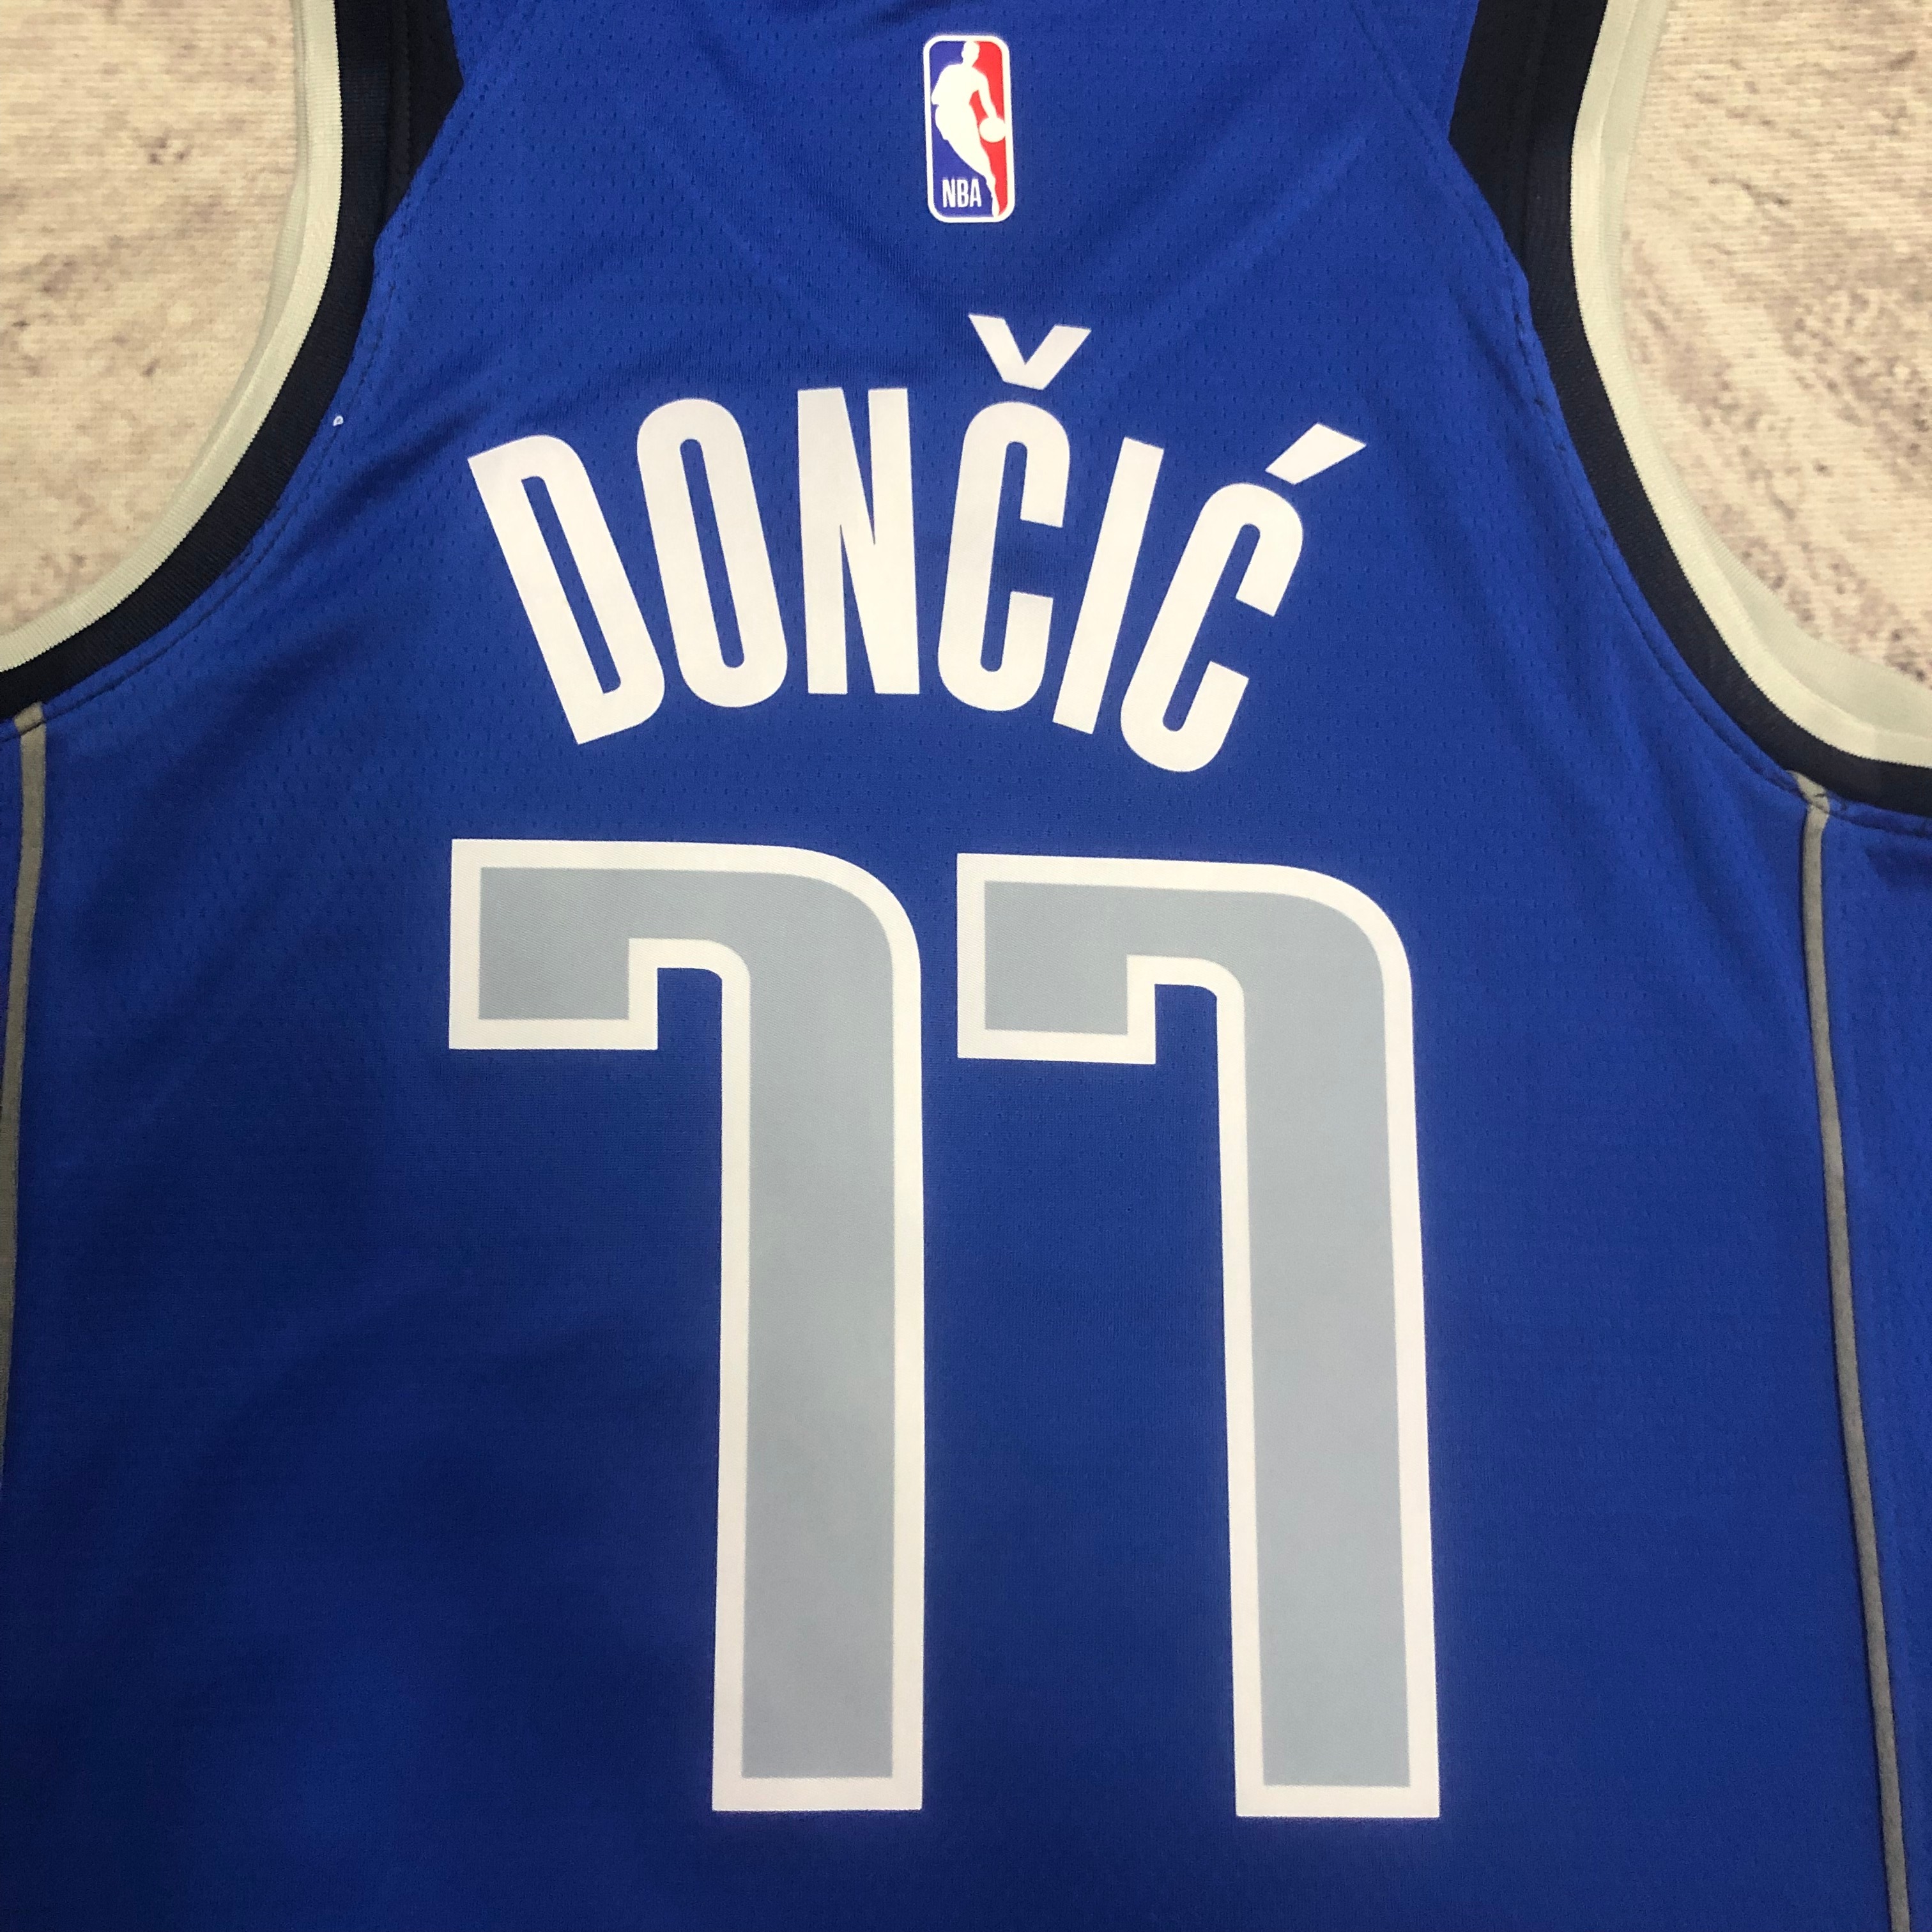 2023 NBA All Star Blue 77#DONCIC Hot Pressed Jersey